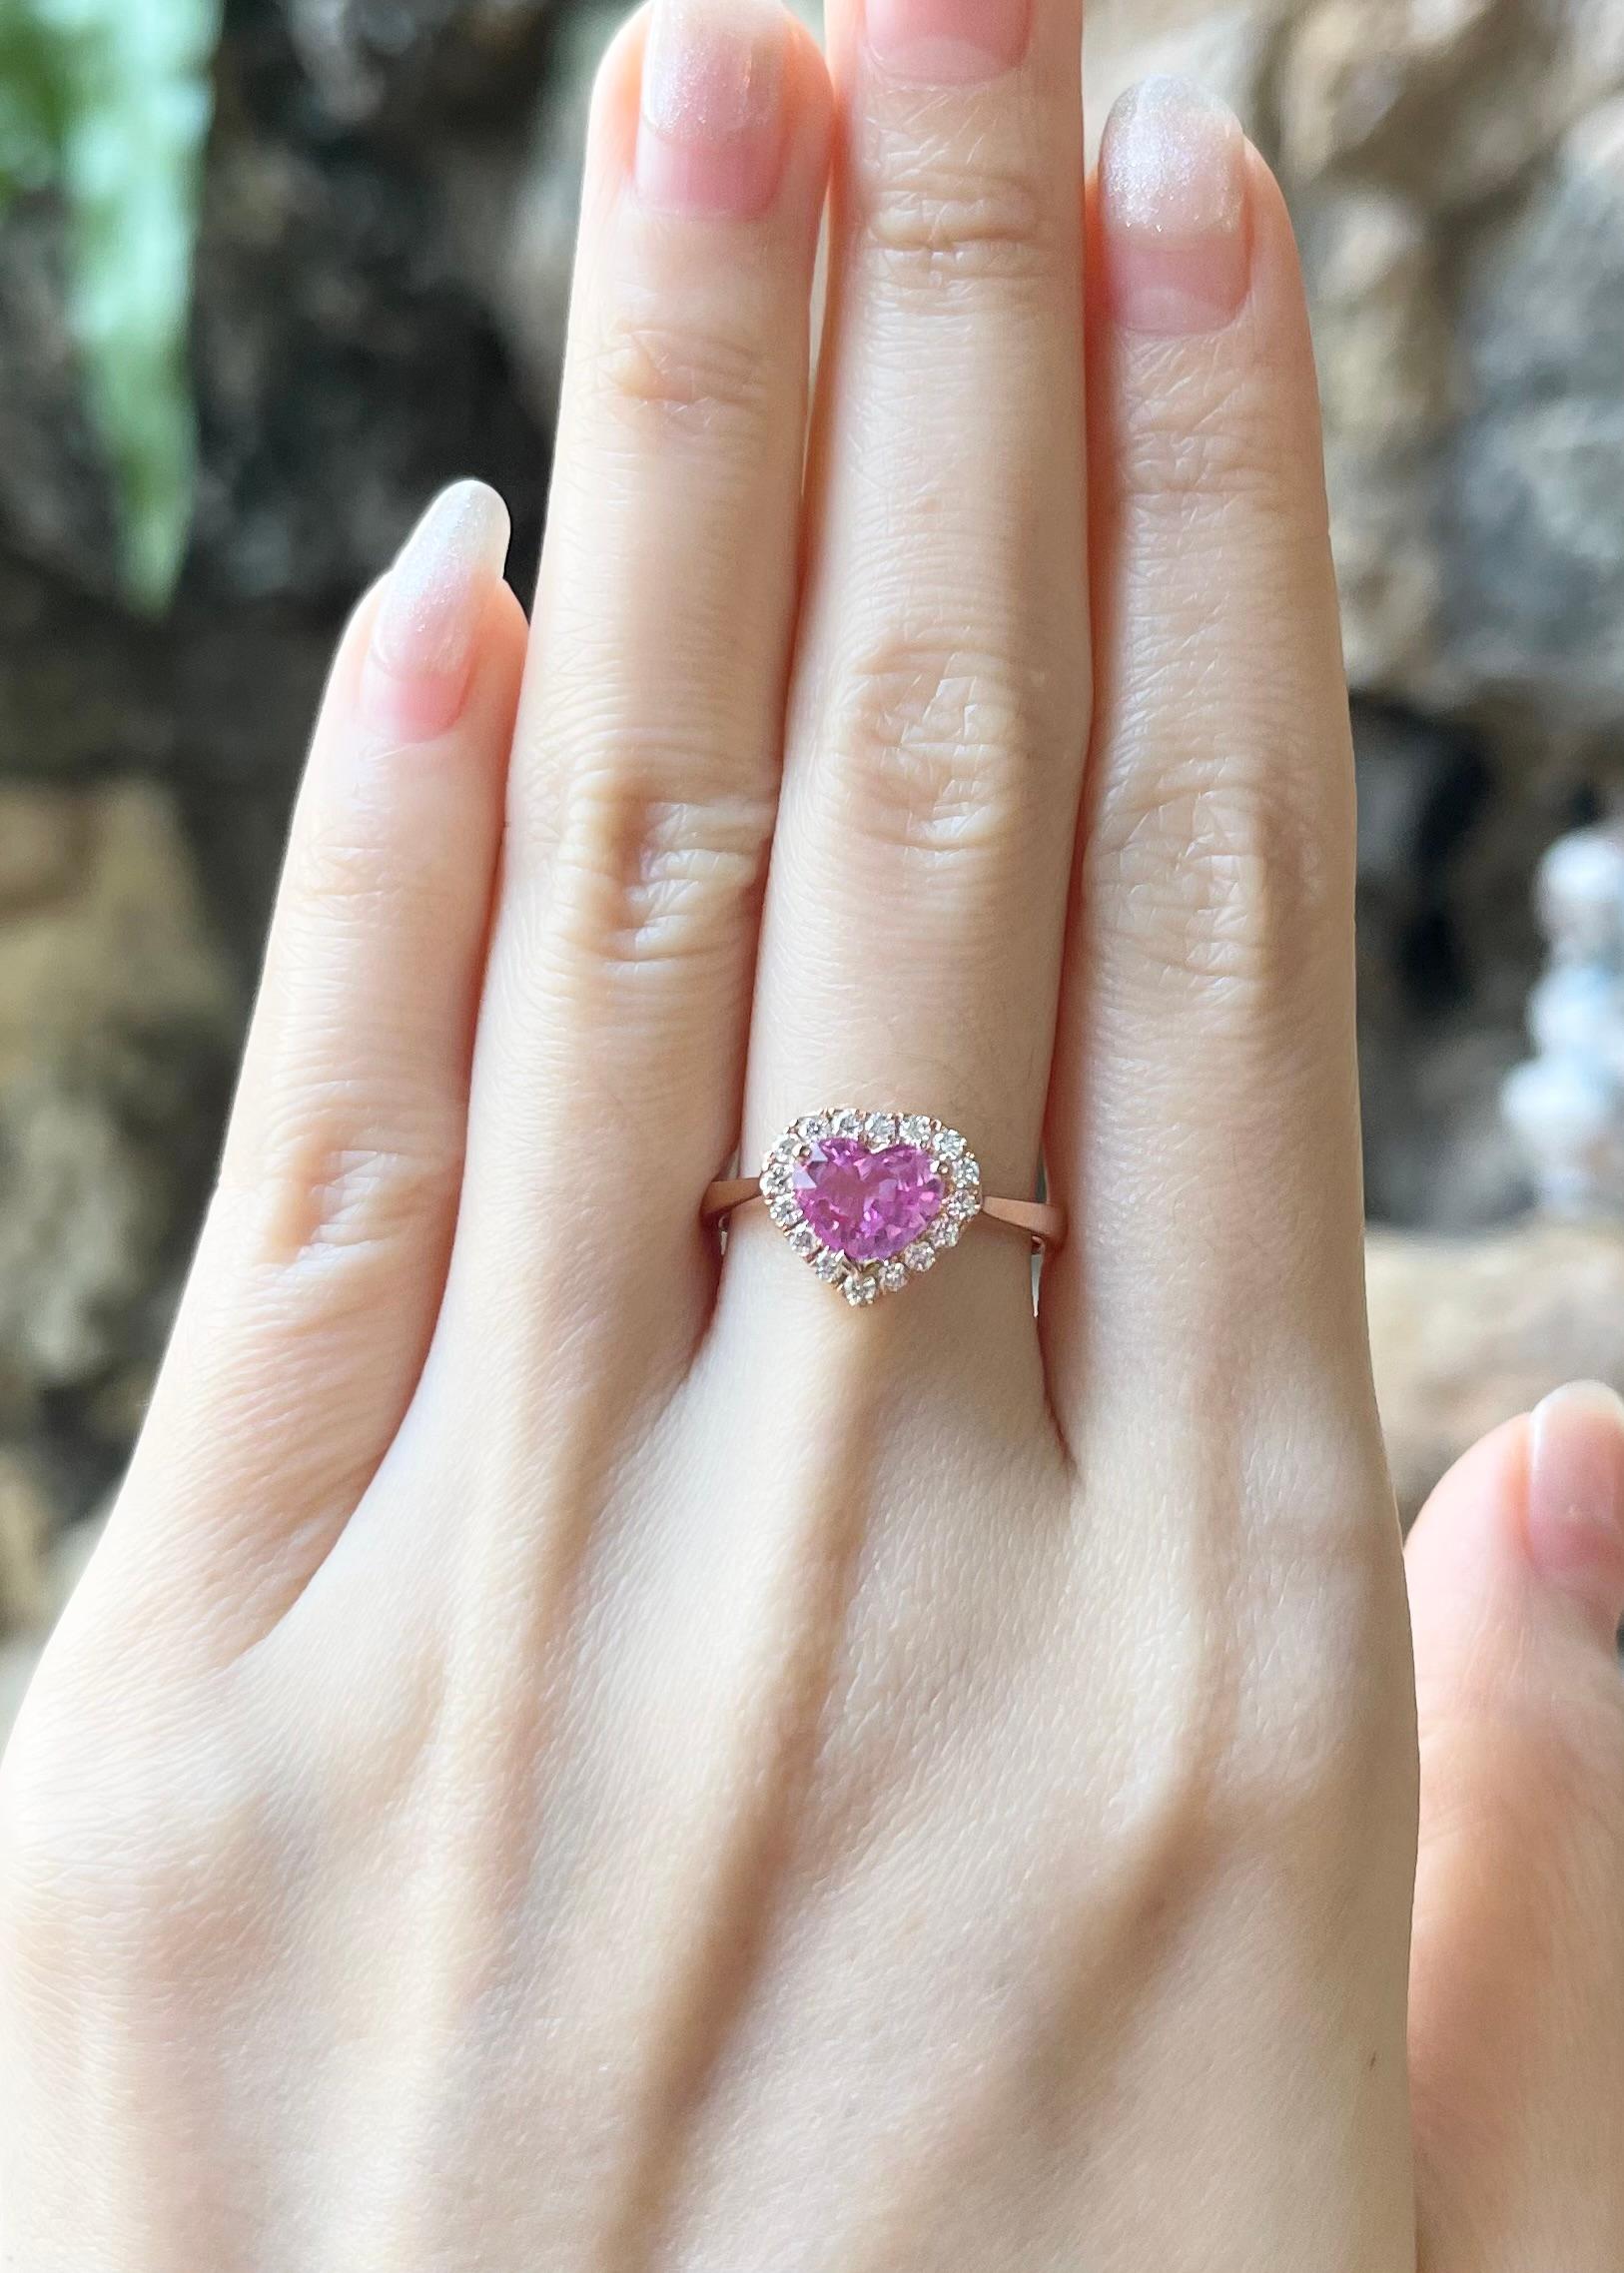 Pink Sapphire 1.50 carats with Diamond 0.22 carats Ring set in 18K Rose Gold Settings

Width:  1.1 cm 
Length: 1.1 cm
Ring Size: 54
Total Weight: 3.81 grams

